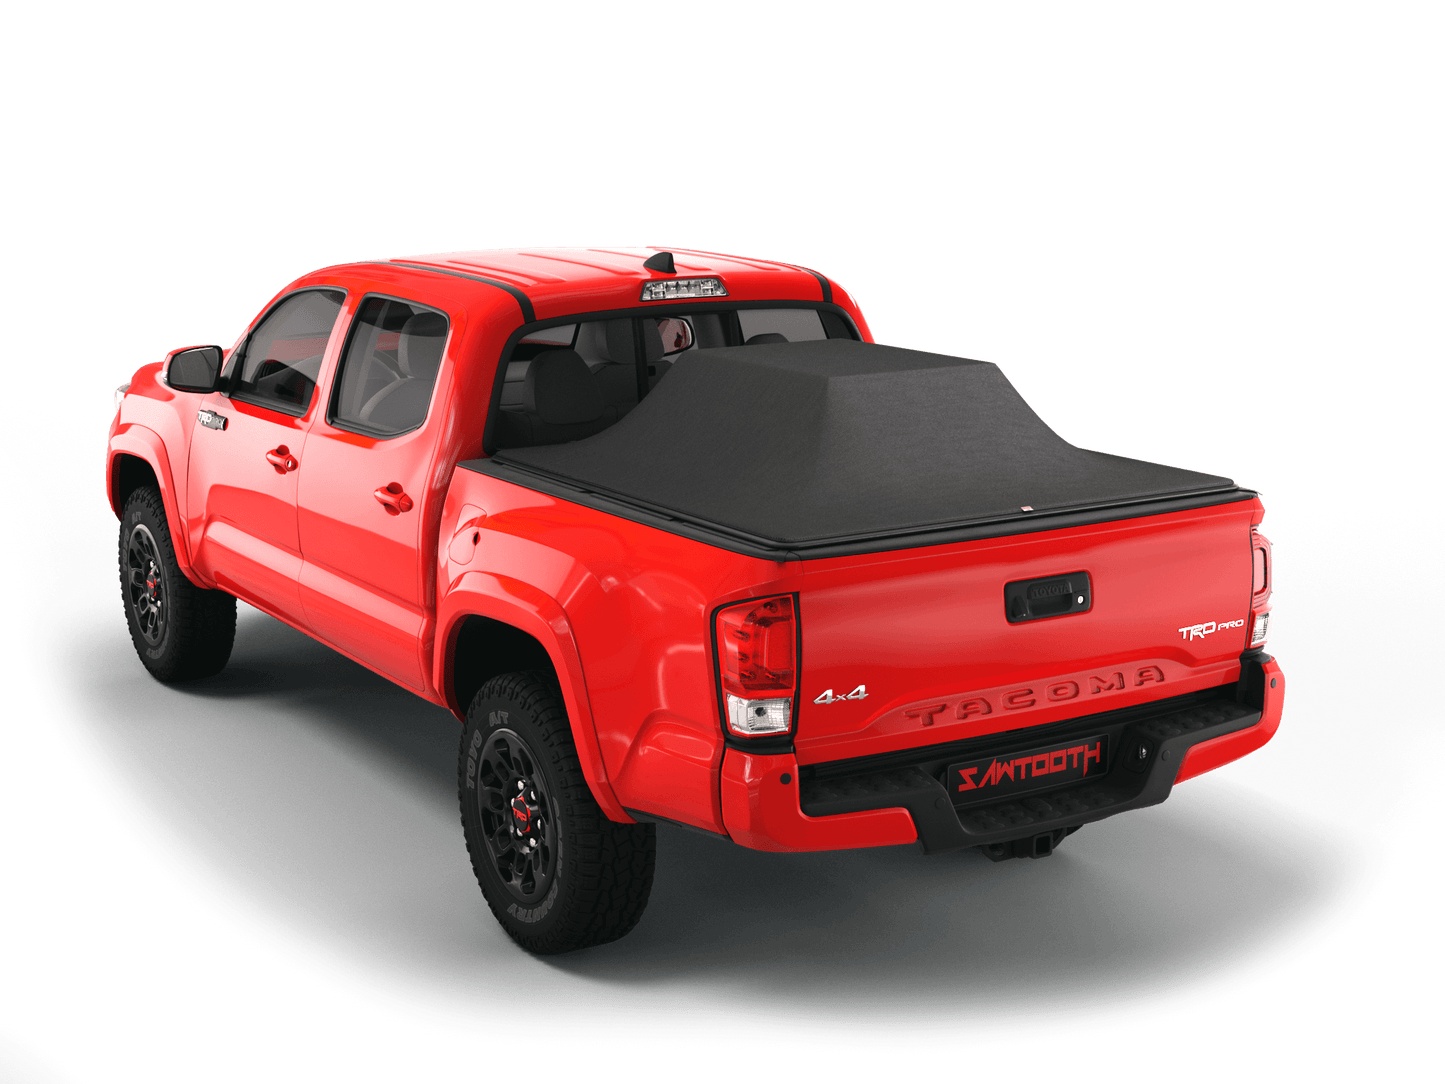 Red Toyota Tacoma with gear in the truck bed and the Sawtooth Stretch tonneau cover expanded over cargo load